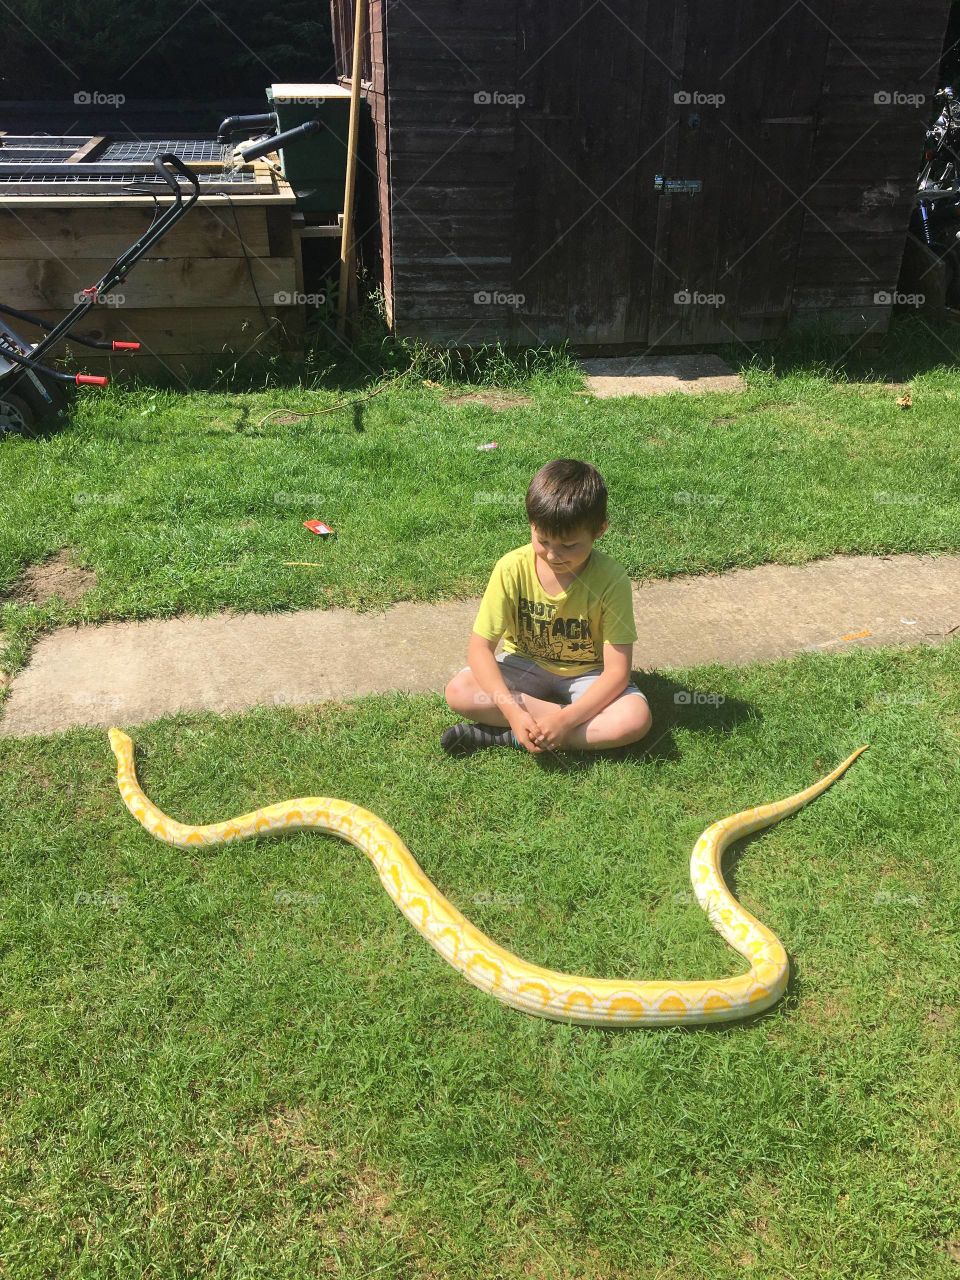 Snake and child